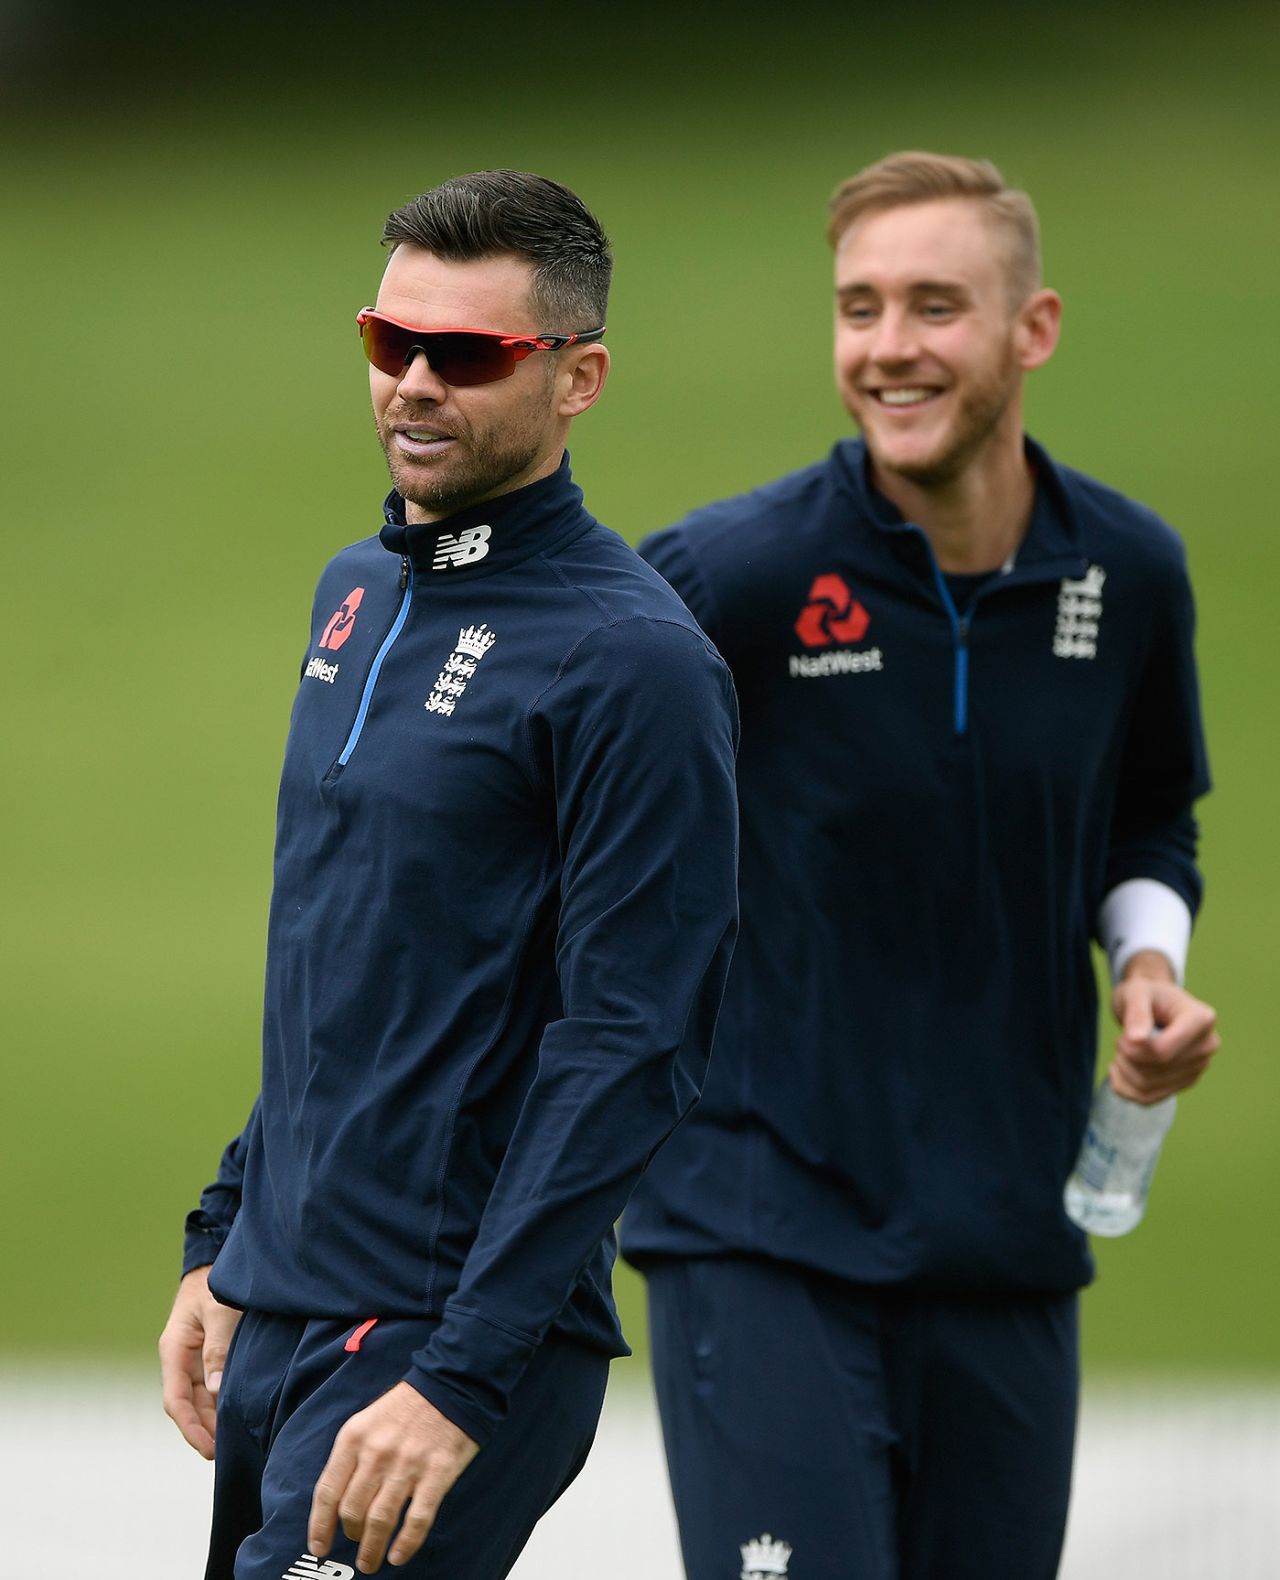 James Anderson and Stuart Broad during training at Hamilton, March 13, 2018